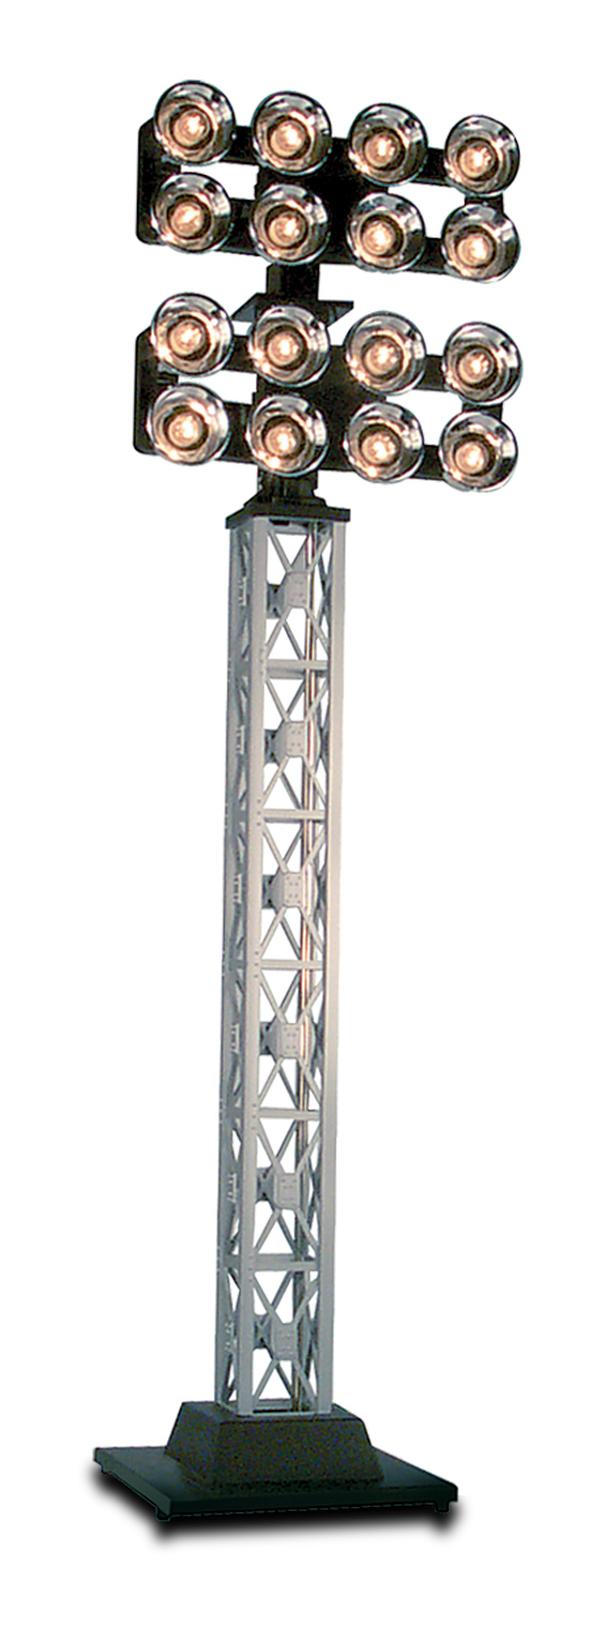 Lionel 6-82013 O Double Floodlight Tower